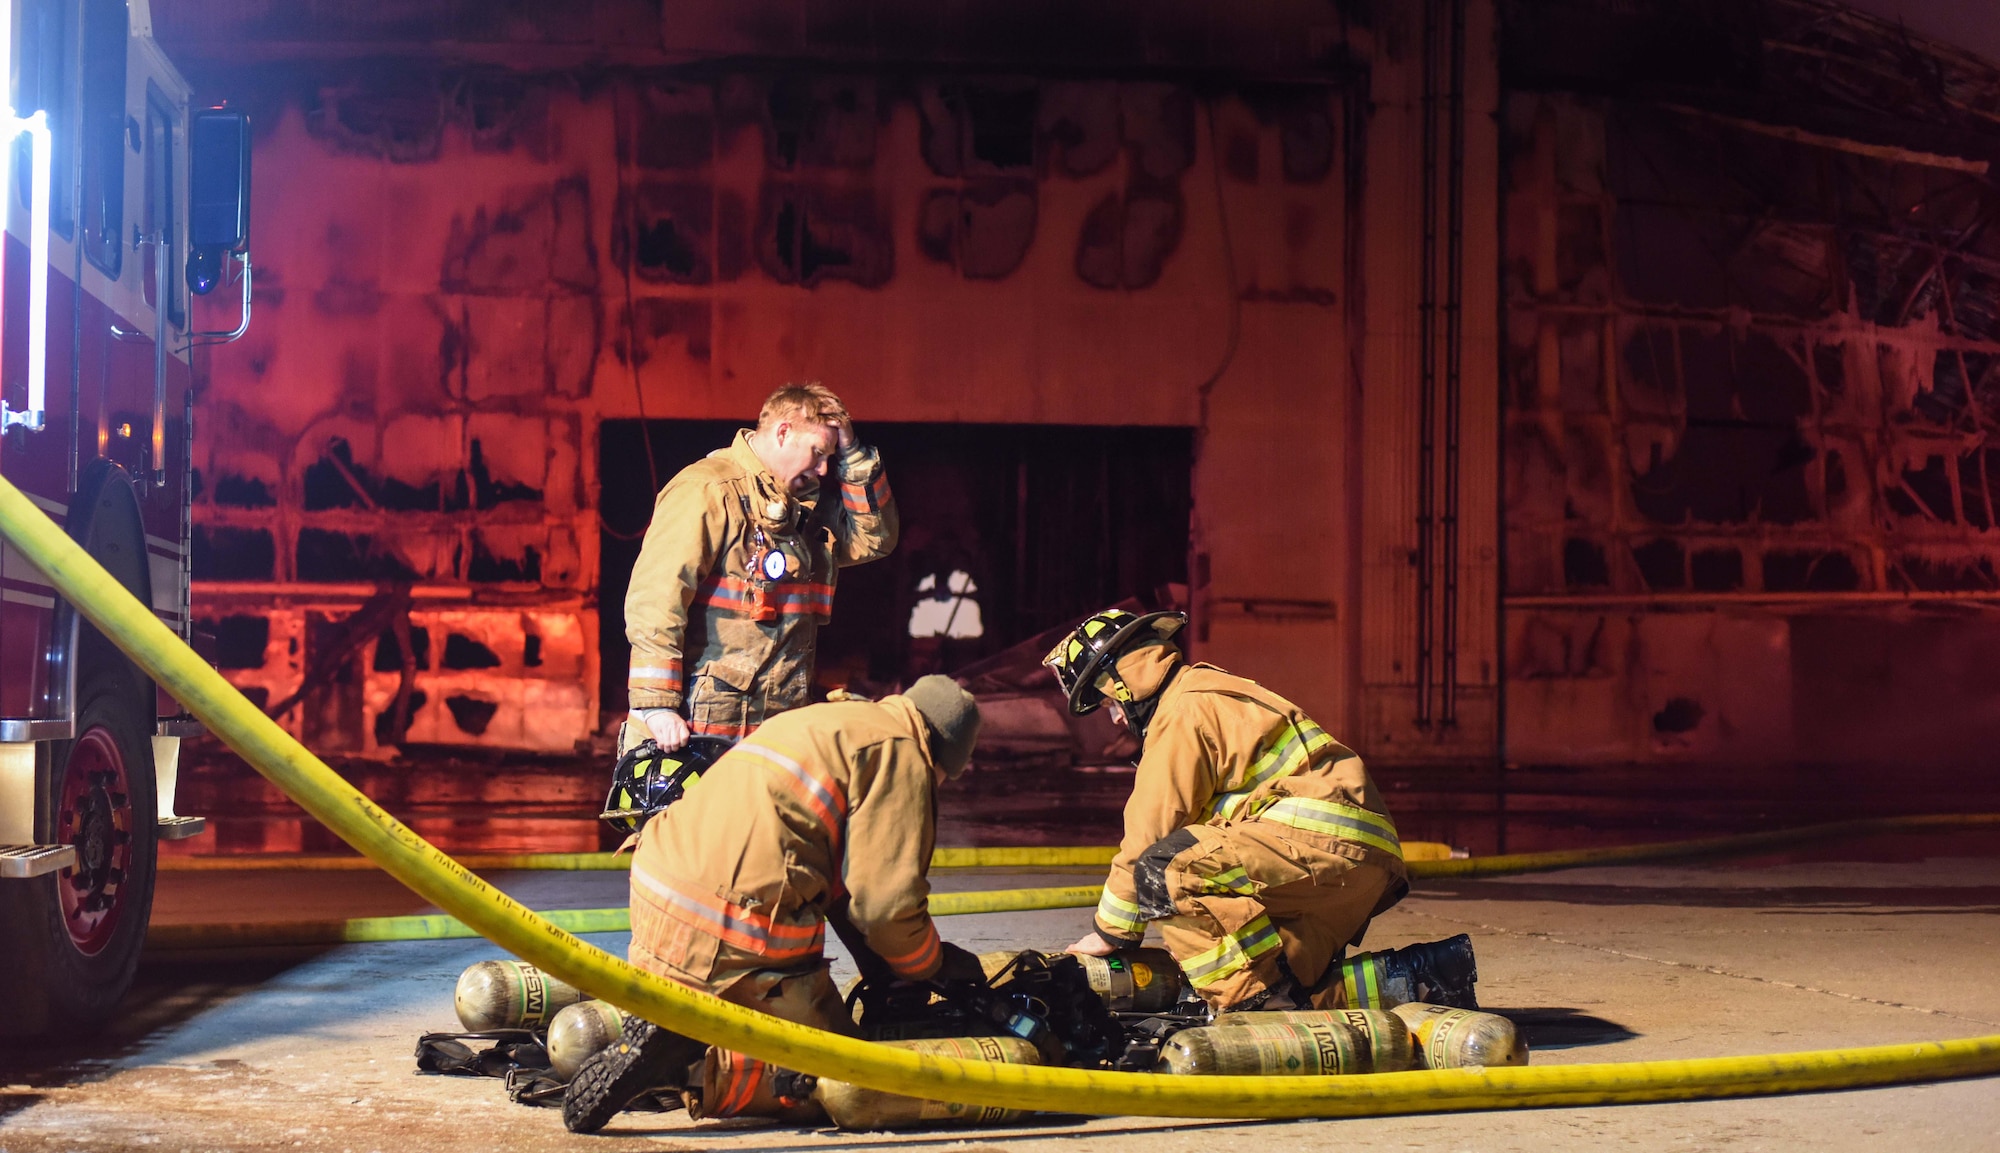 Firefighters assess the situation of the scene Dec. 28, 2019, at Minot Air Force Base, North Dakota. These Airmen are trying to decide the best way to attack the fire. (U.S. Air Force Photos By Airman 1st Class Caleb S. Kimmell)